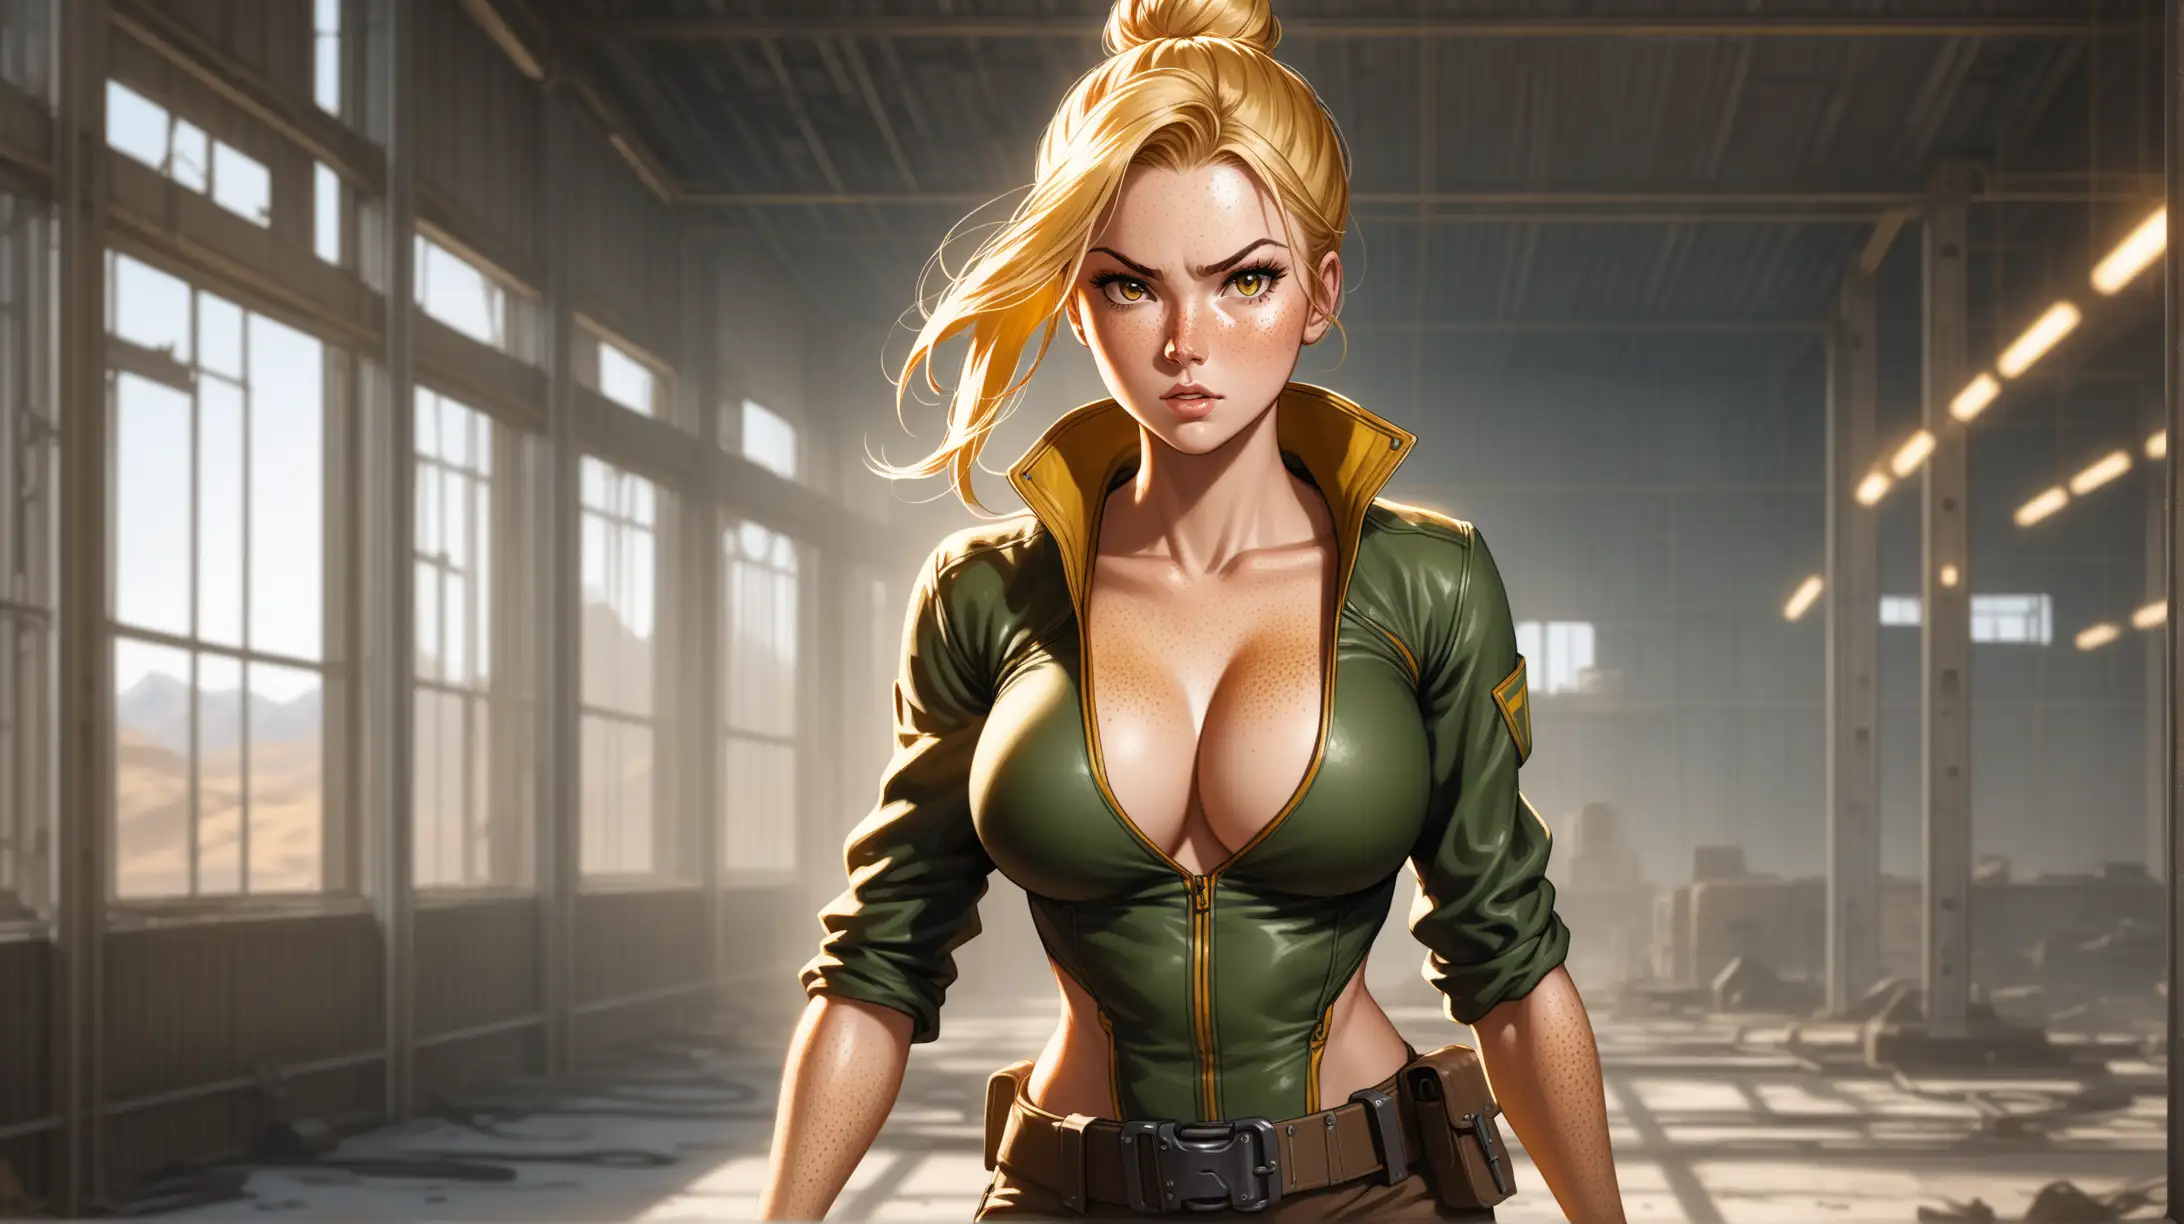 Seductive Blonde Woman with FalloutInspired Outfit in Dynamic Indoor Portrait